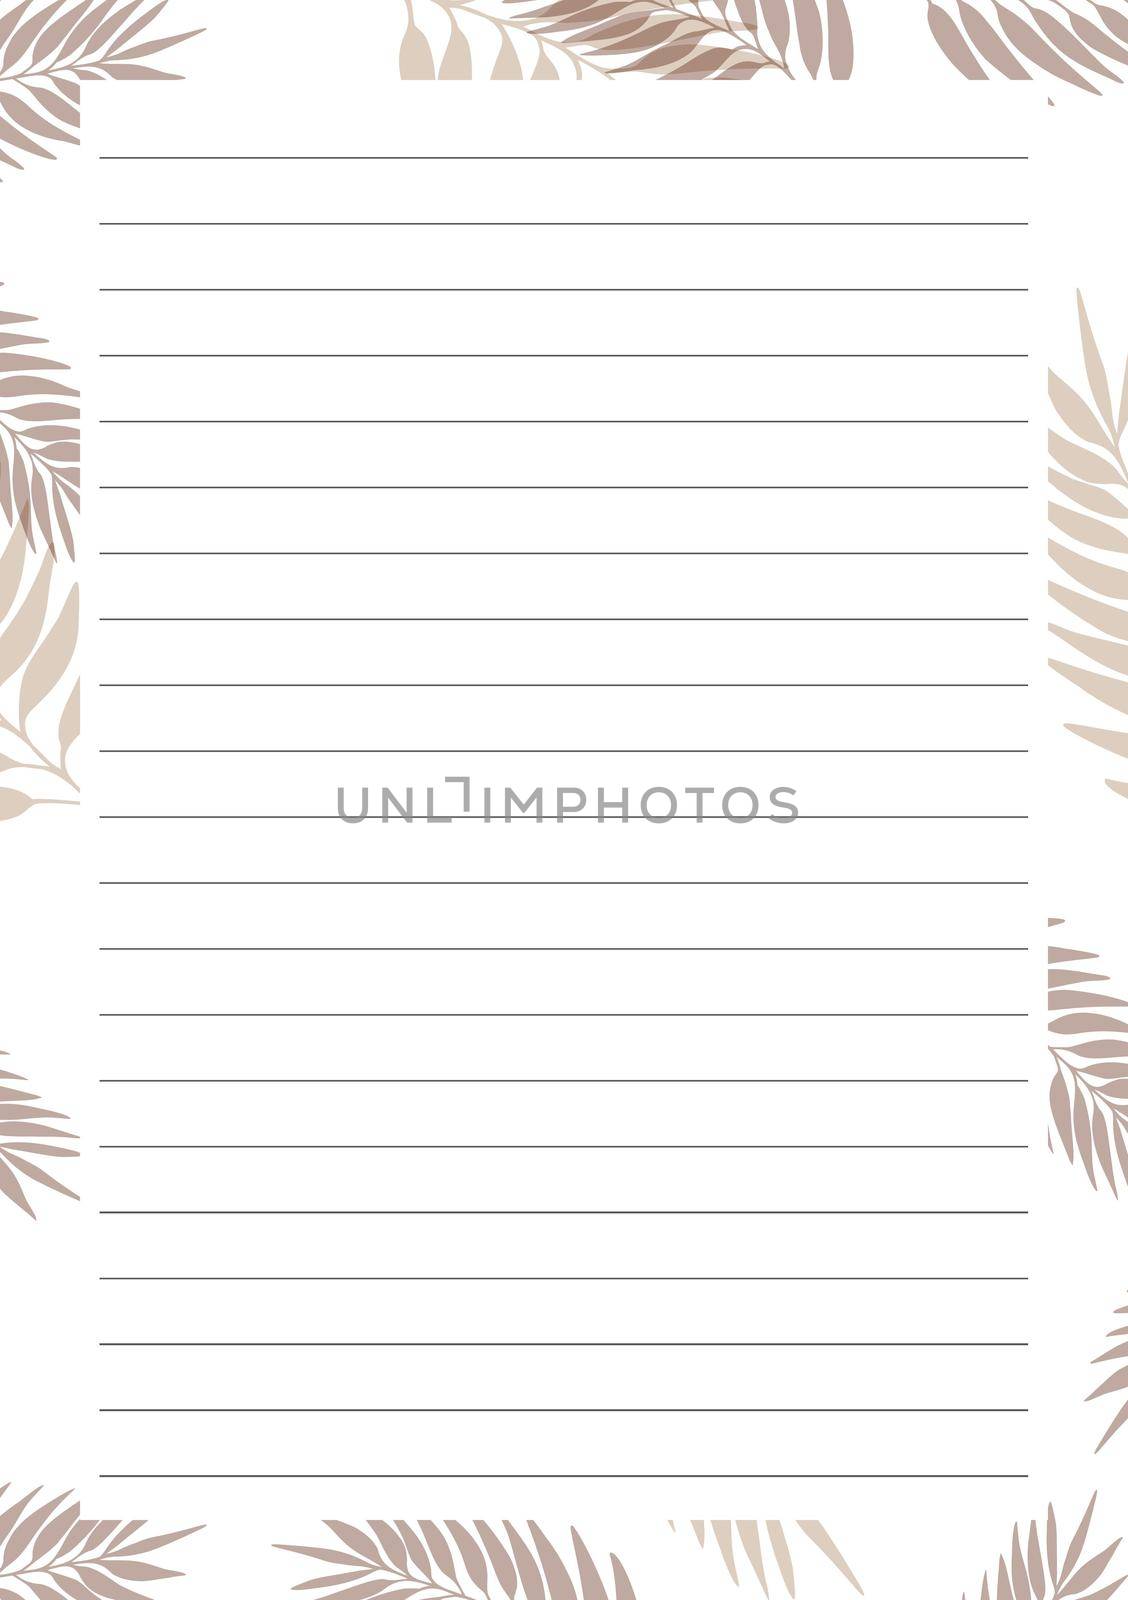 Grid paper. Abstract striped background with color horizontal lines. Printing paper note on floral background. Optimal A5 size. Geometric pattern for school, copybooks, notebooks, diary, notes, books